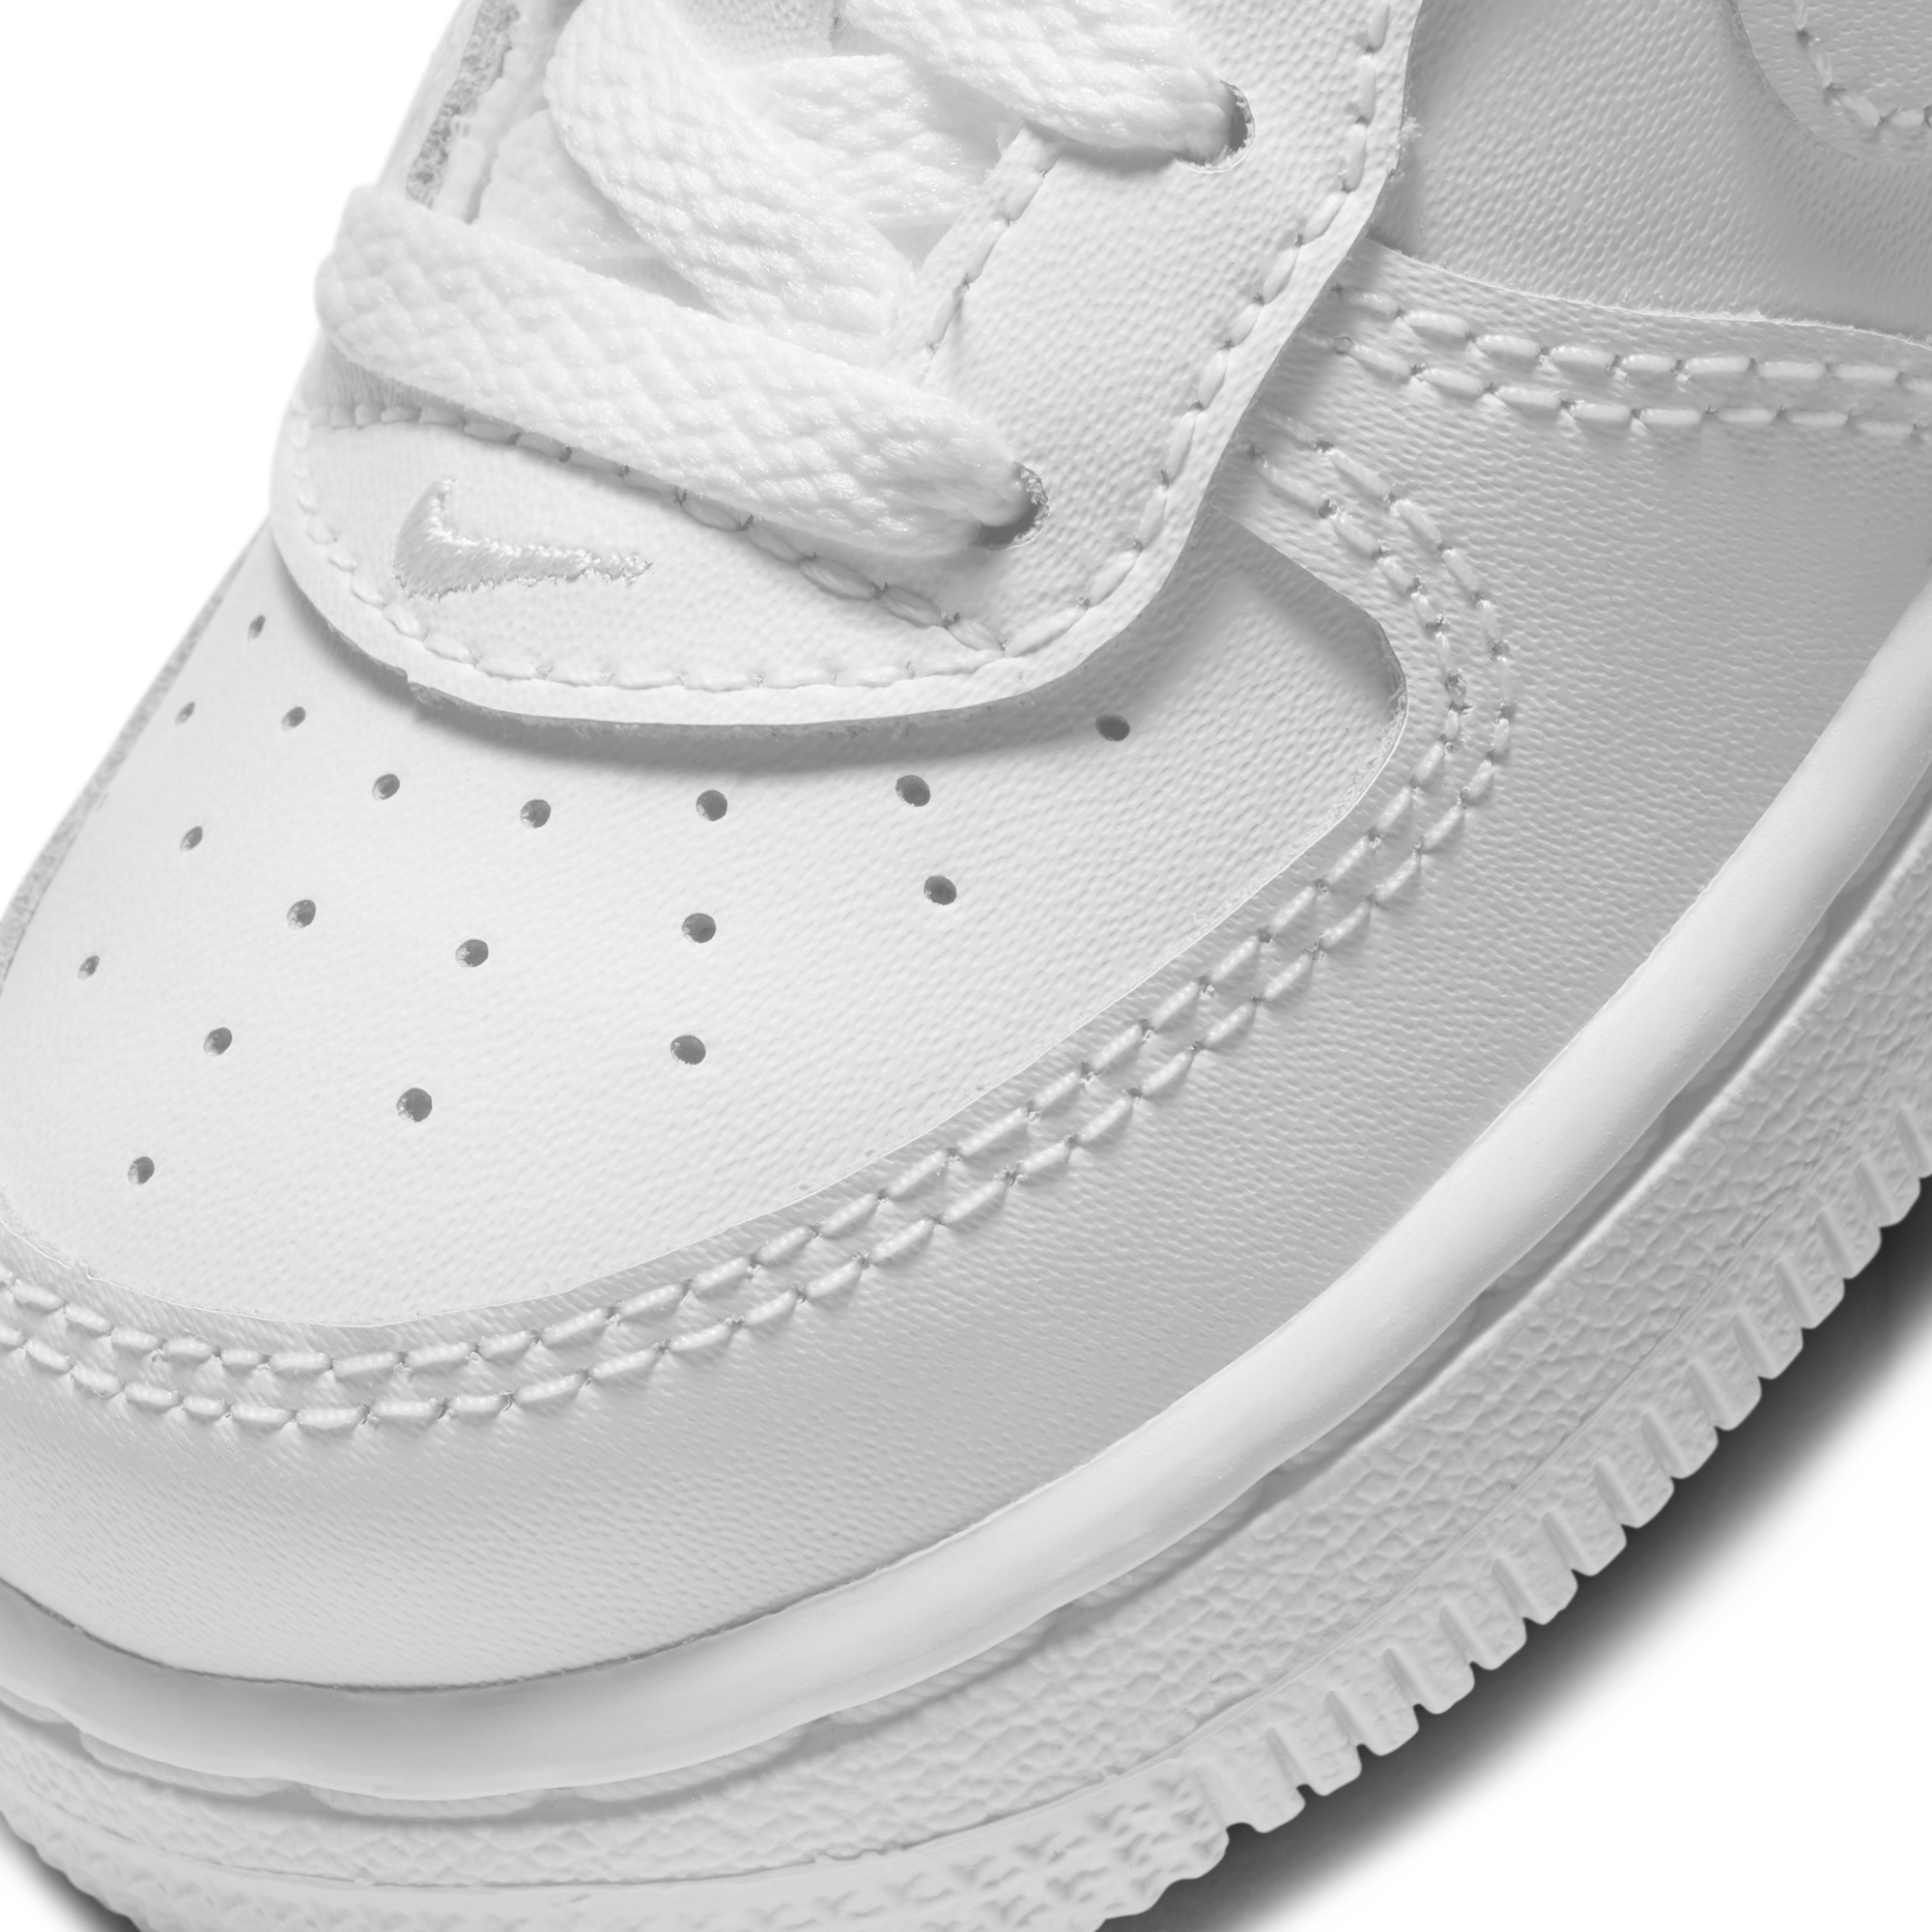 Toddler Nike Air Force 1 LE 'White'